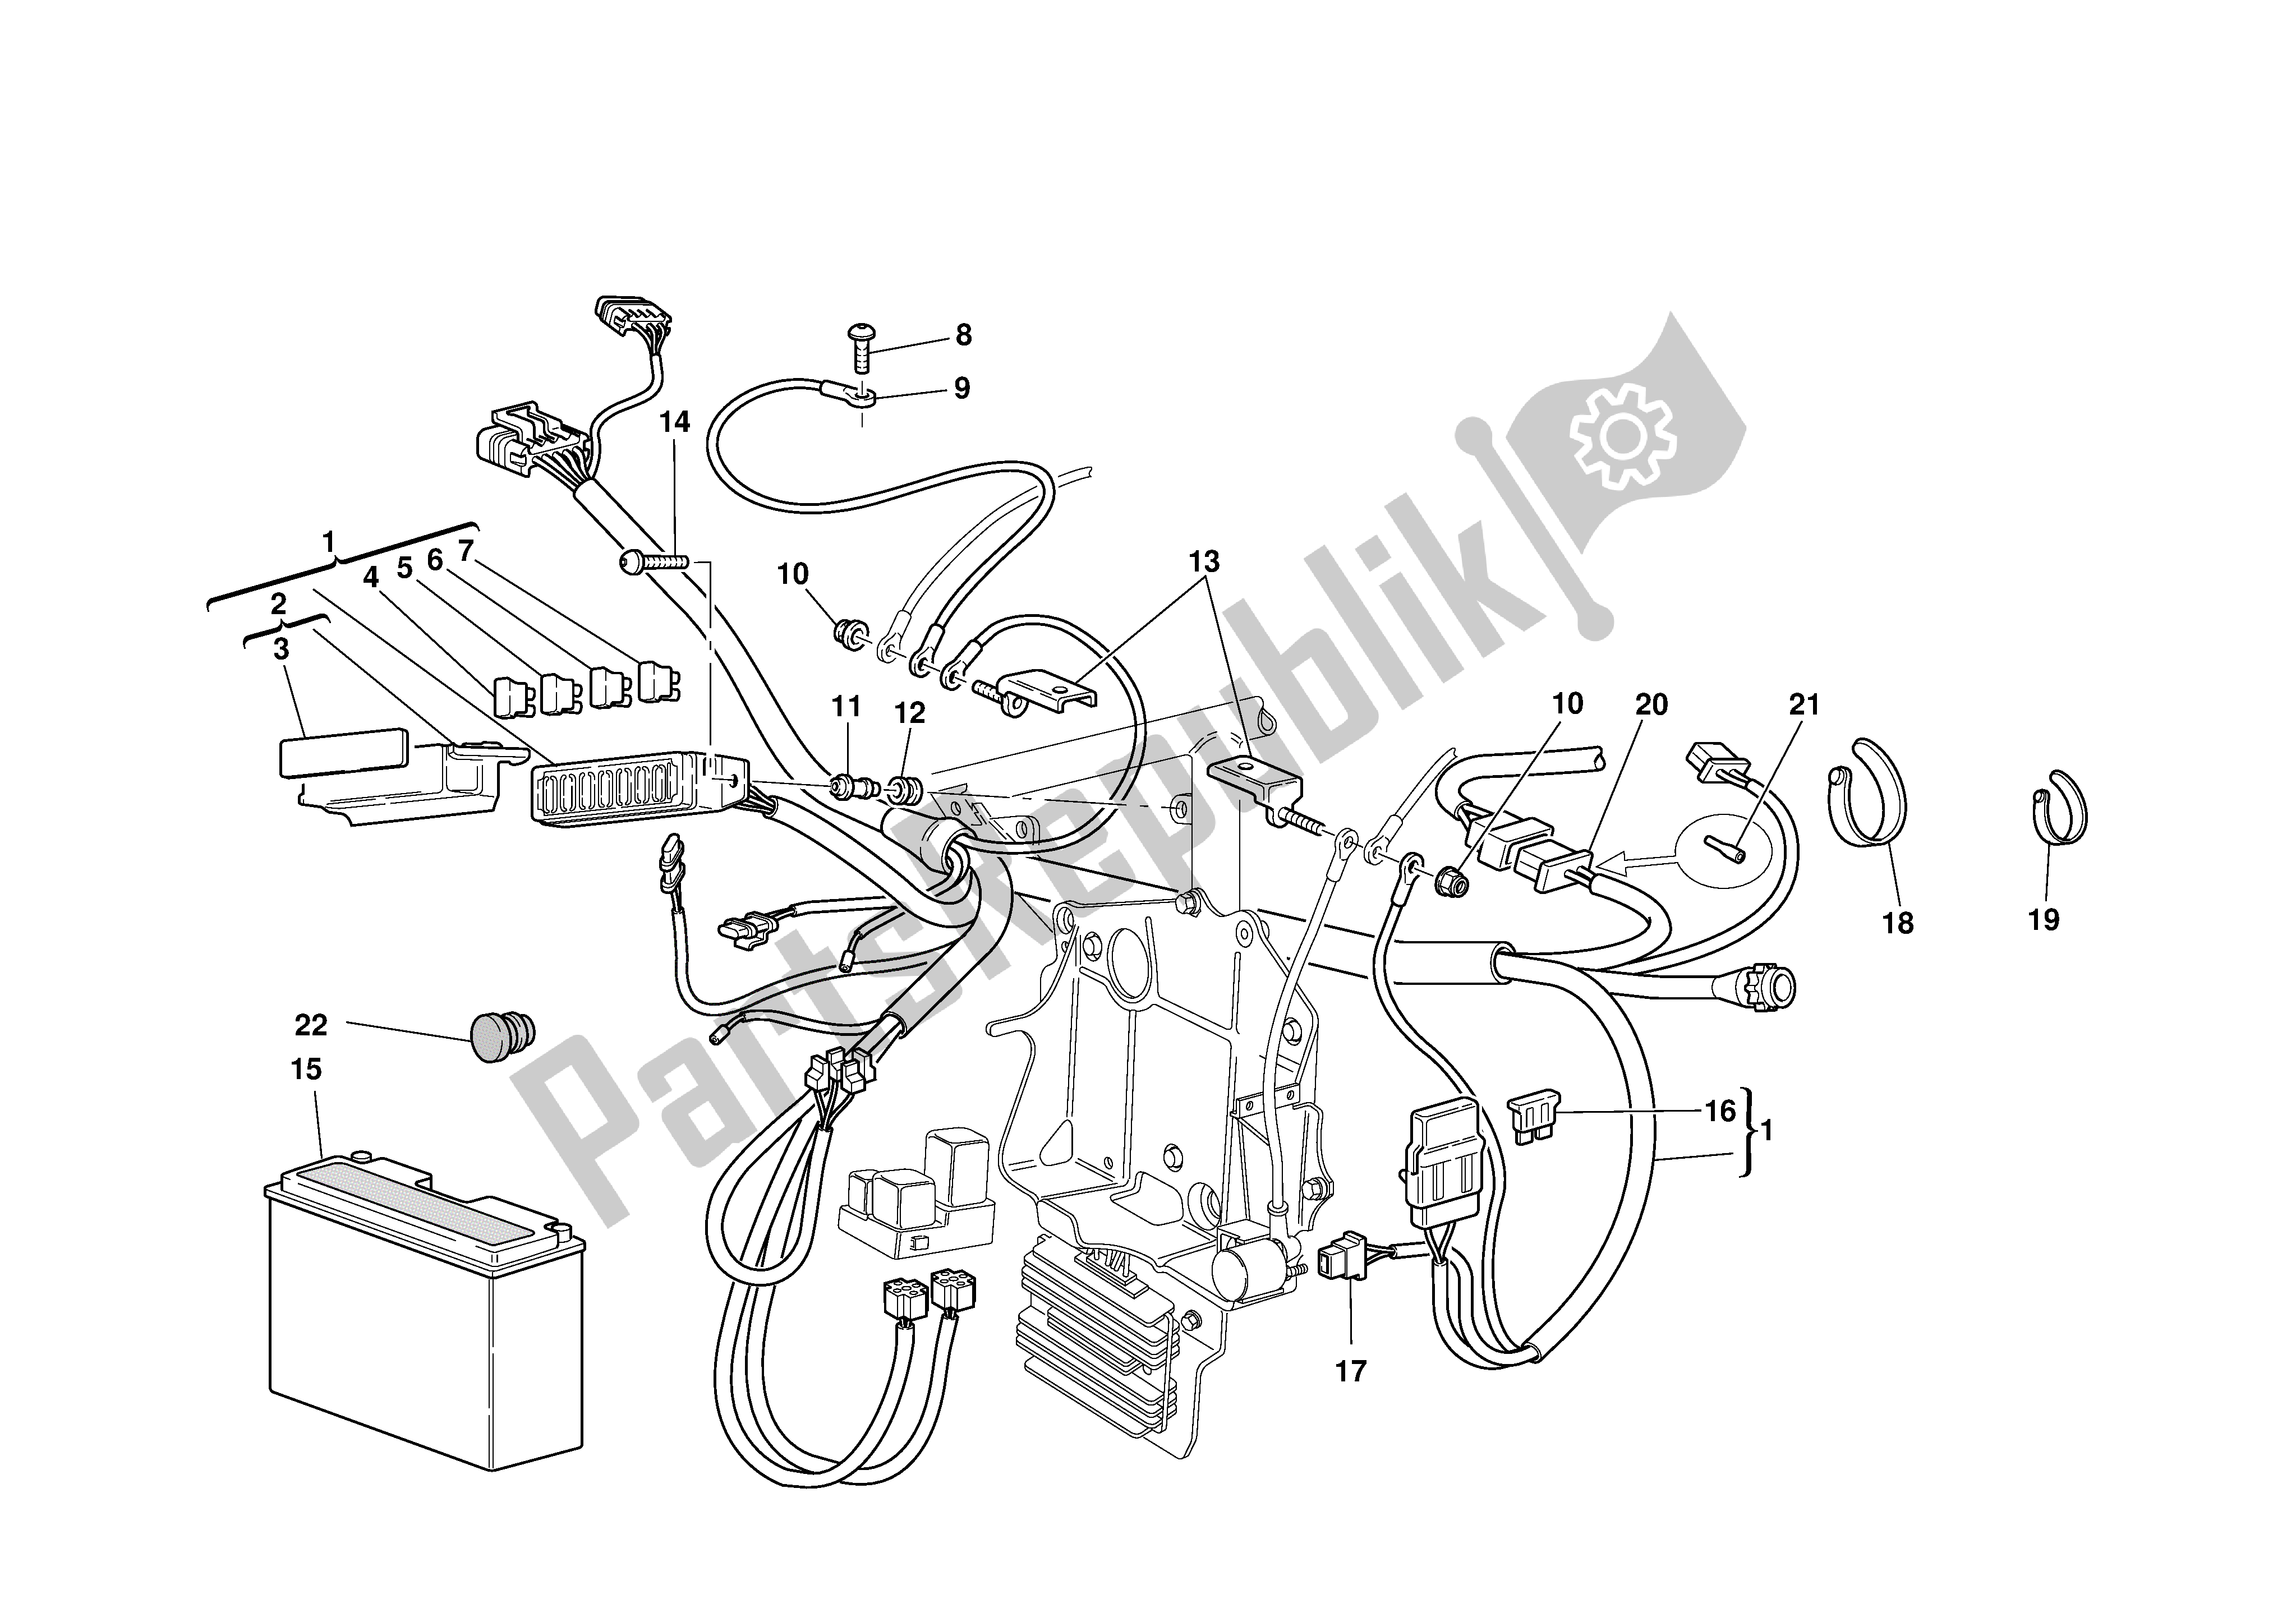 All parts for the Electric System of the Ducati 996S Biposto 2001